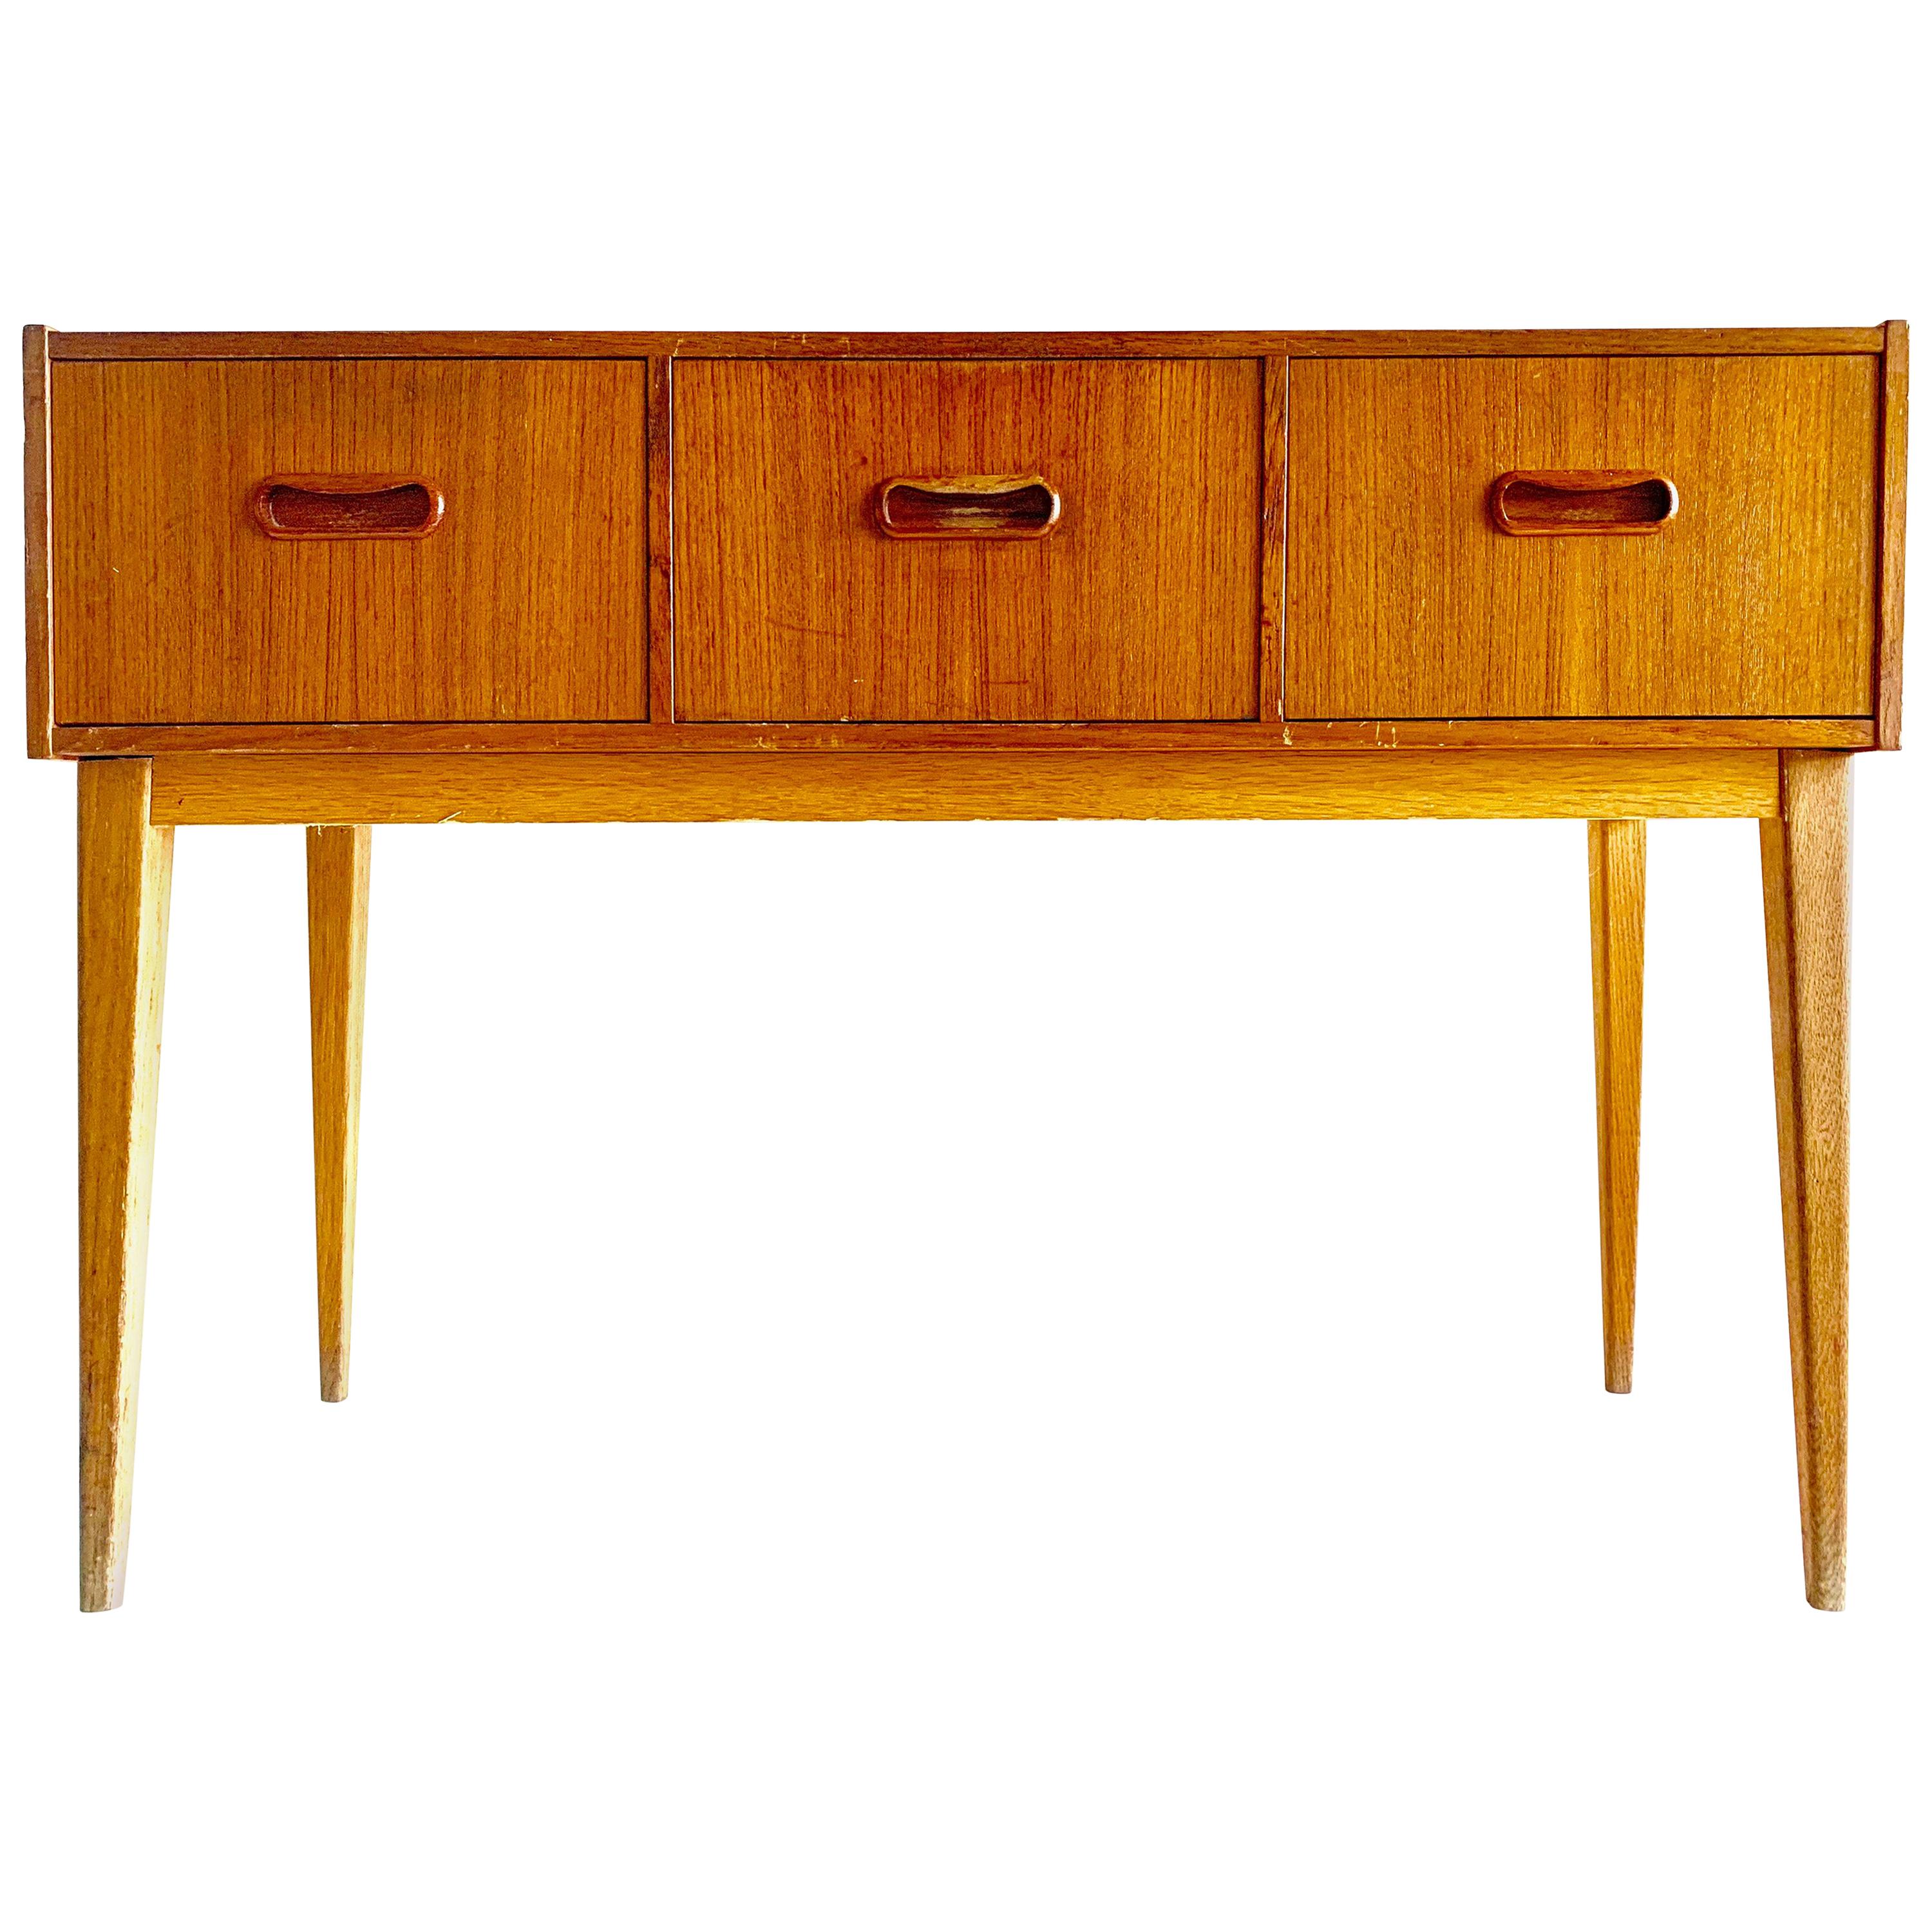 Swedish Midcentury Teak Chest of Drawers, 1960s For Sale